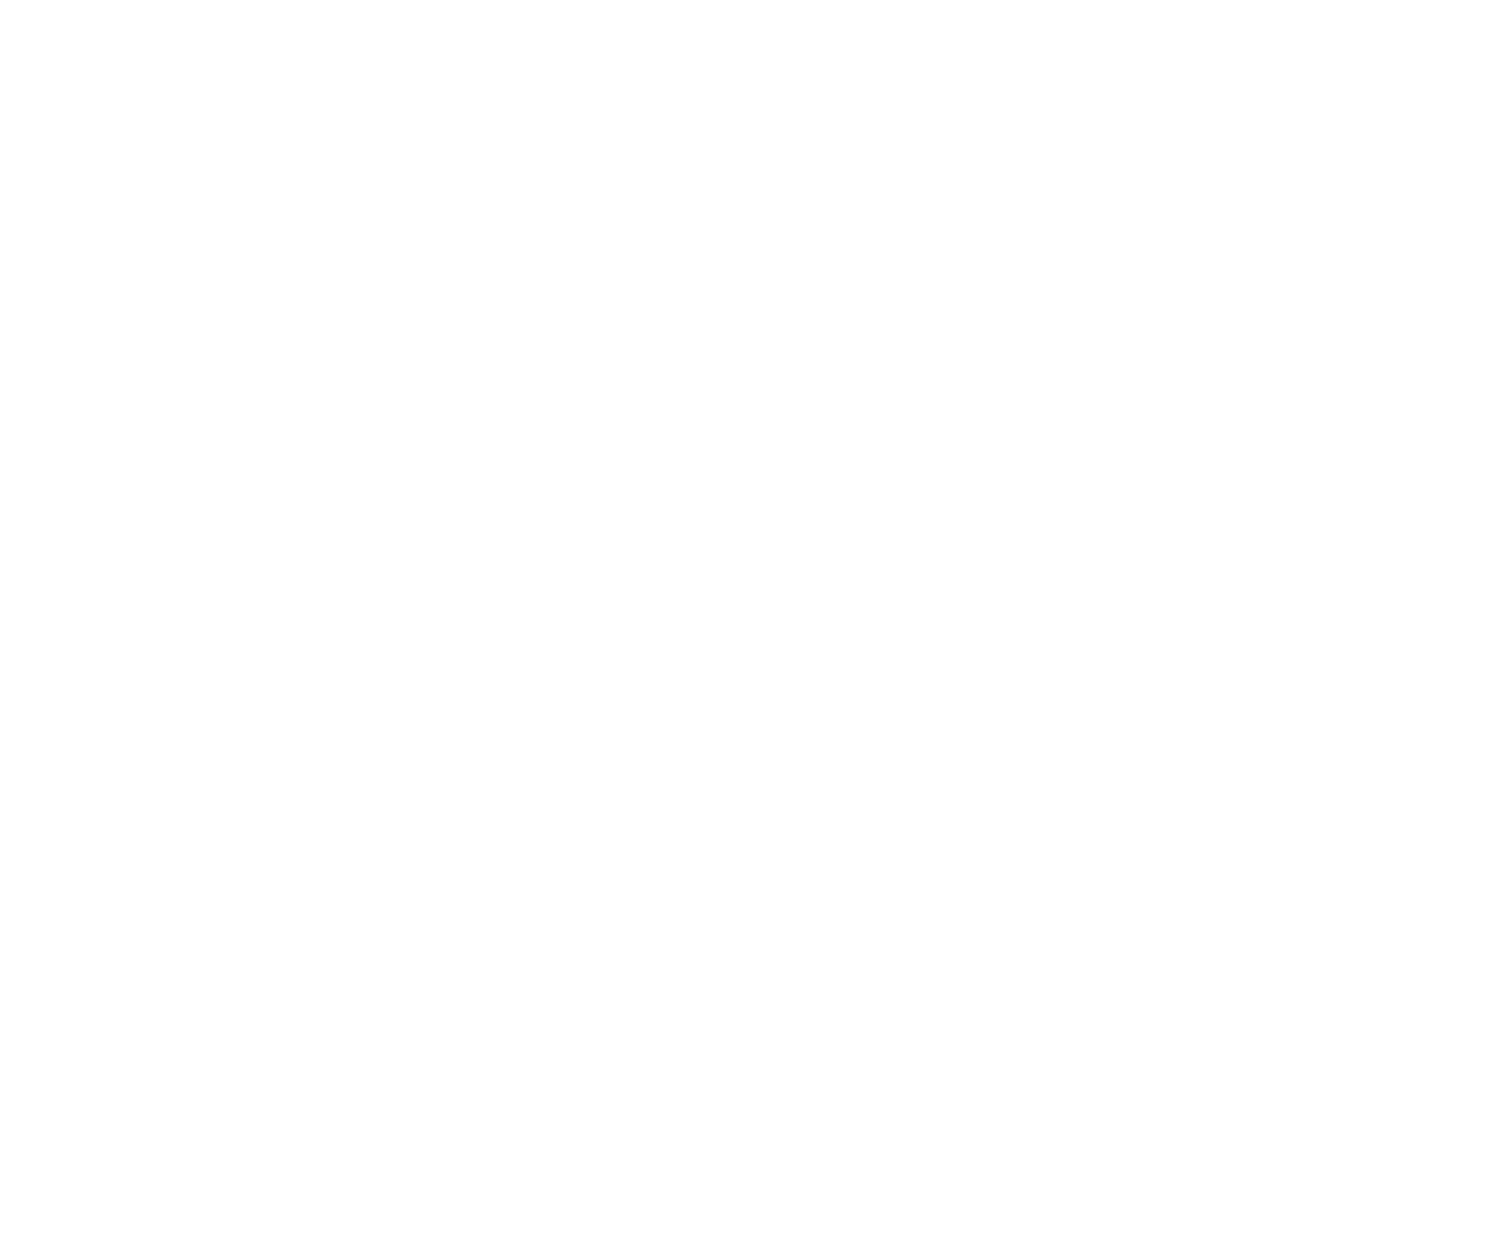 W_SeoulWebfest_OfficialSelection_2021.png